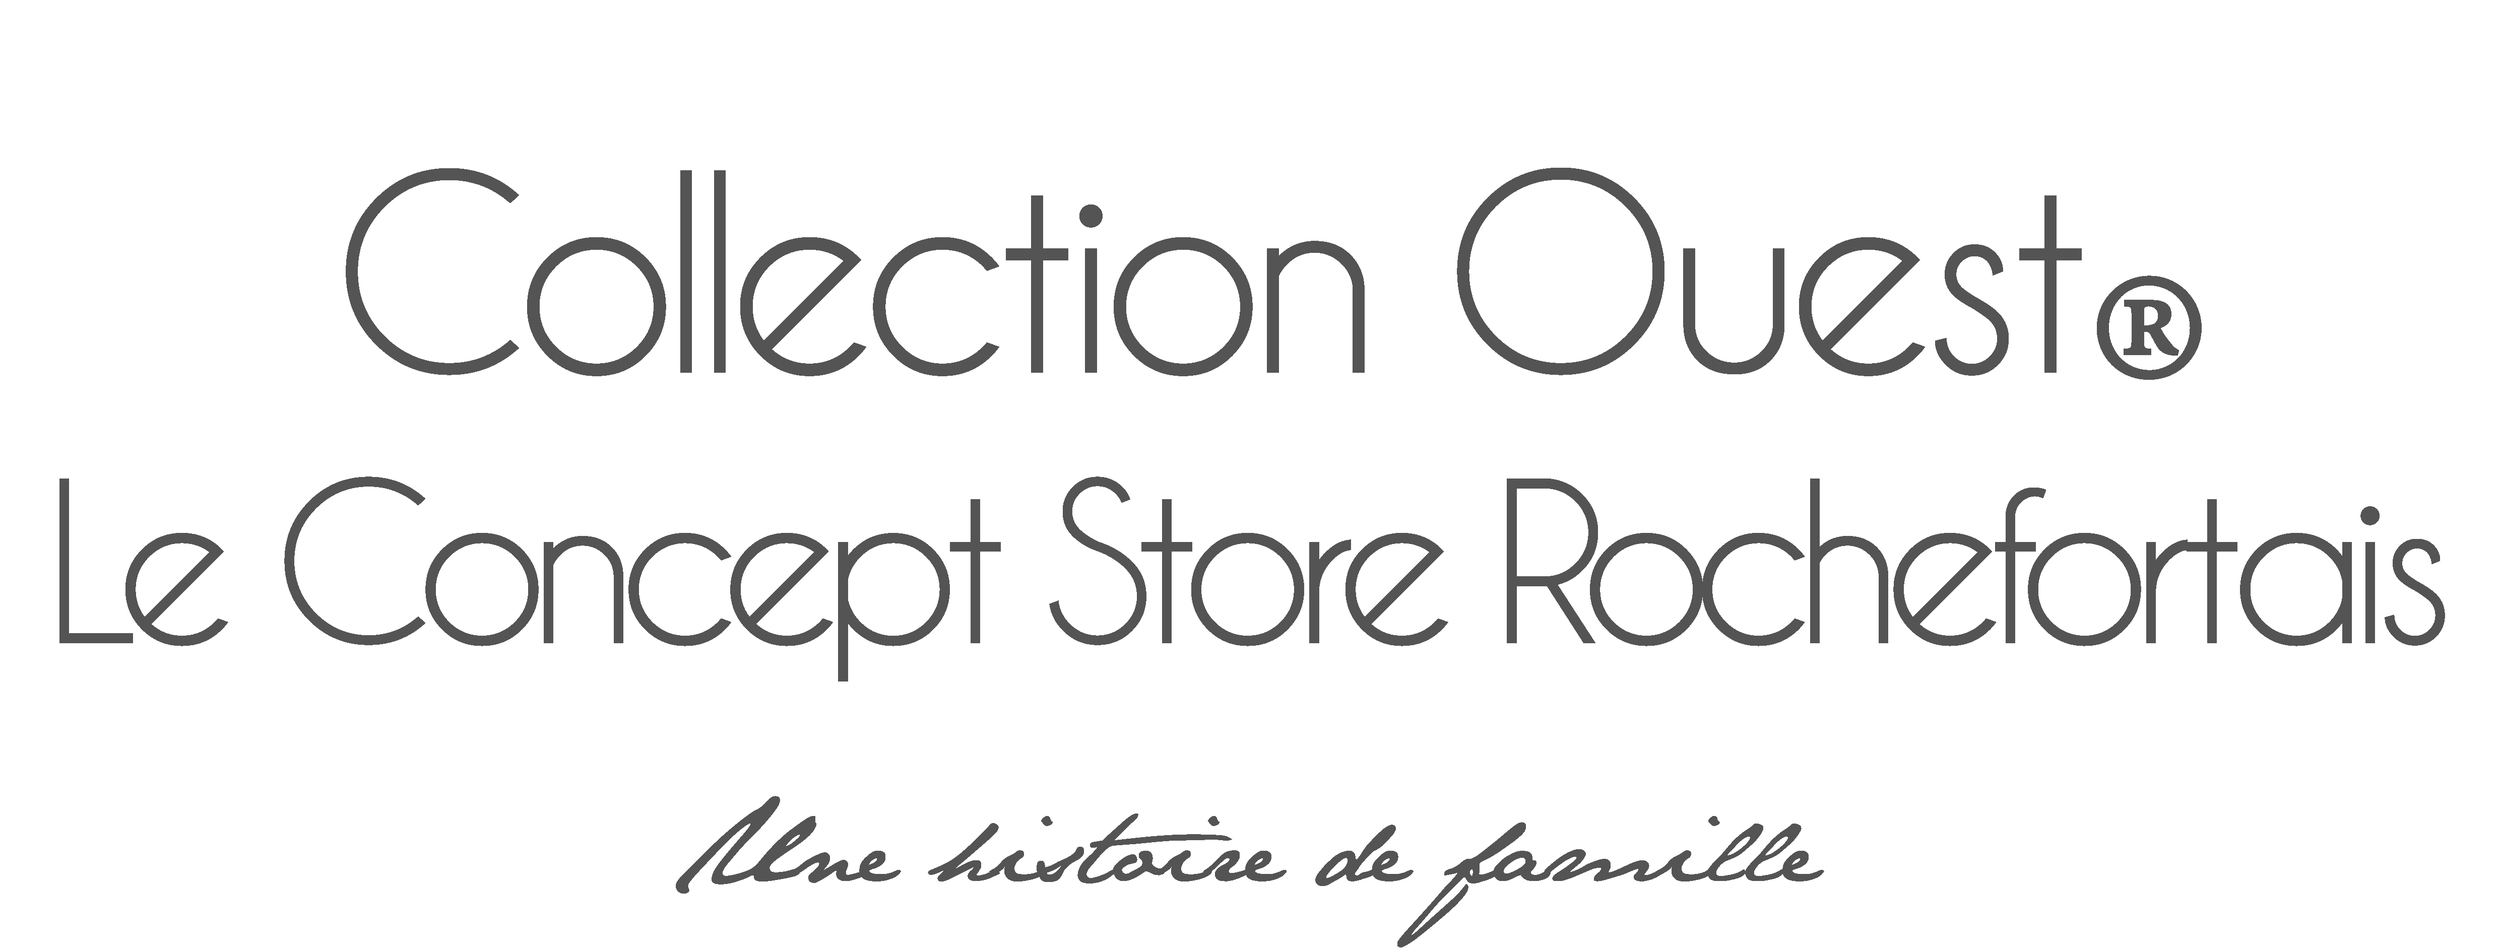 collection-ouest